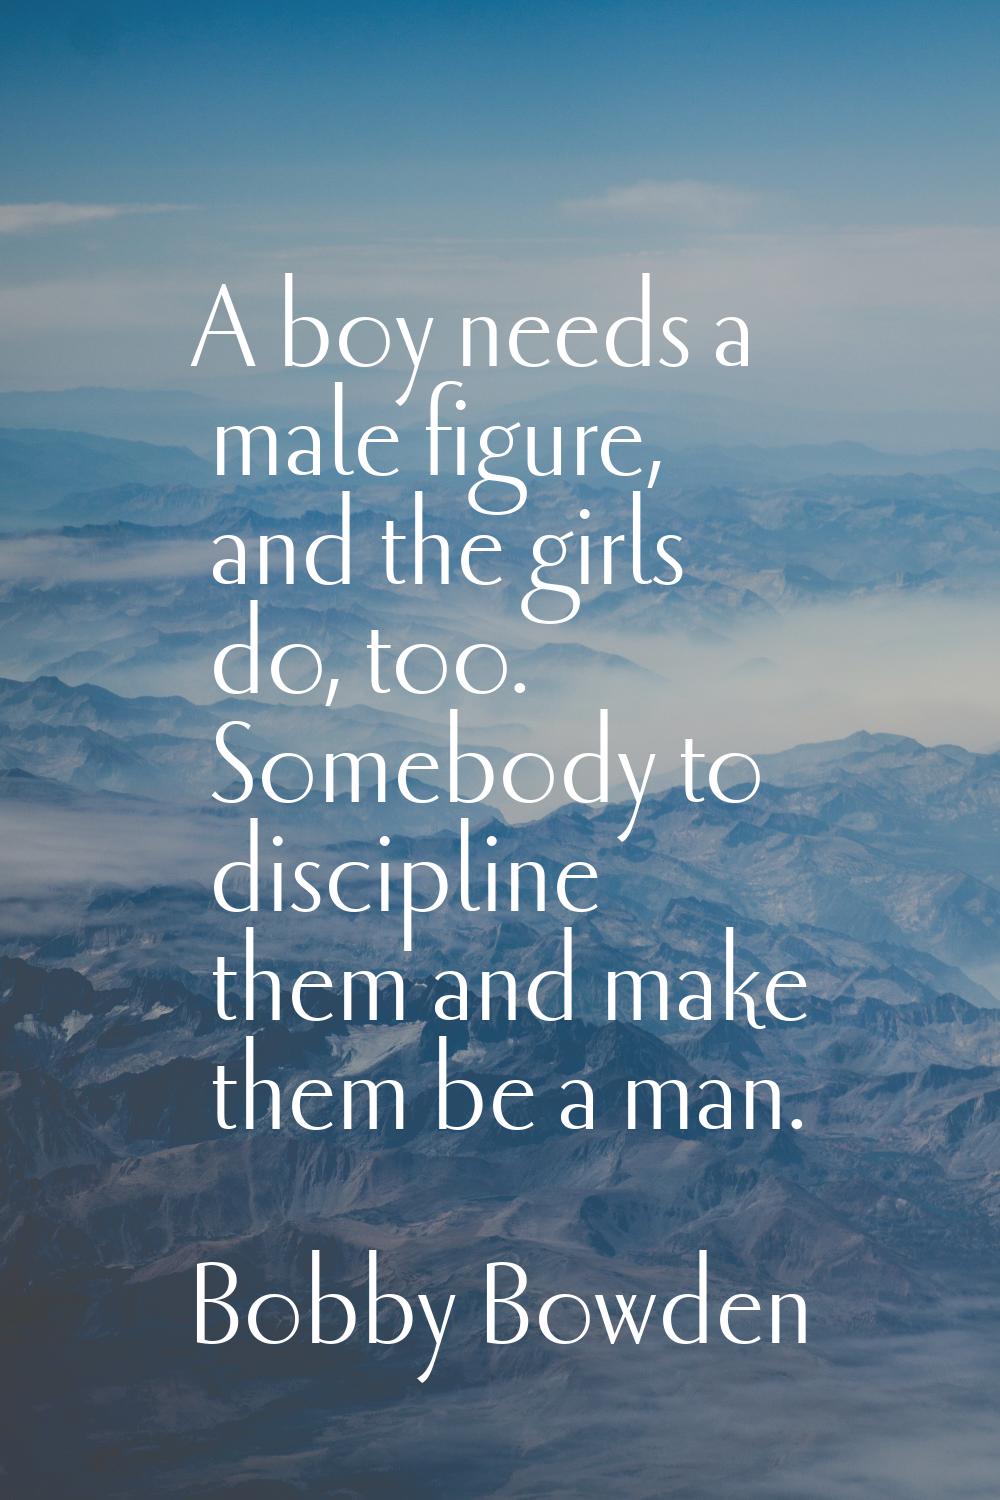 A boy needs a male figure, and the girls do, too. Somebody to discipline them and make them be a ma